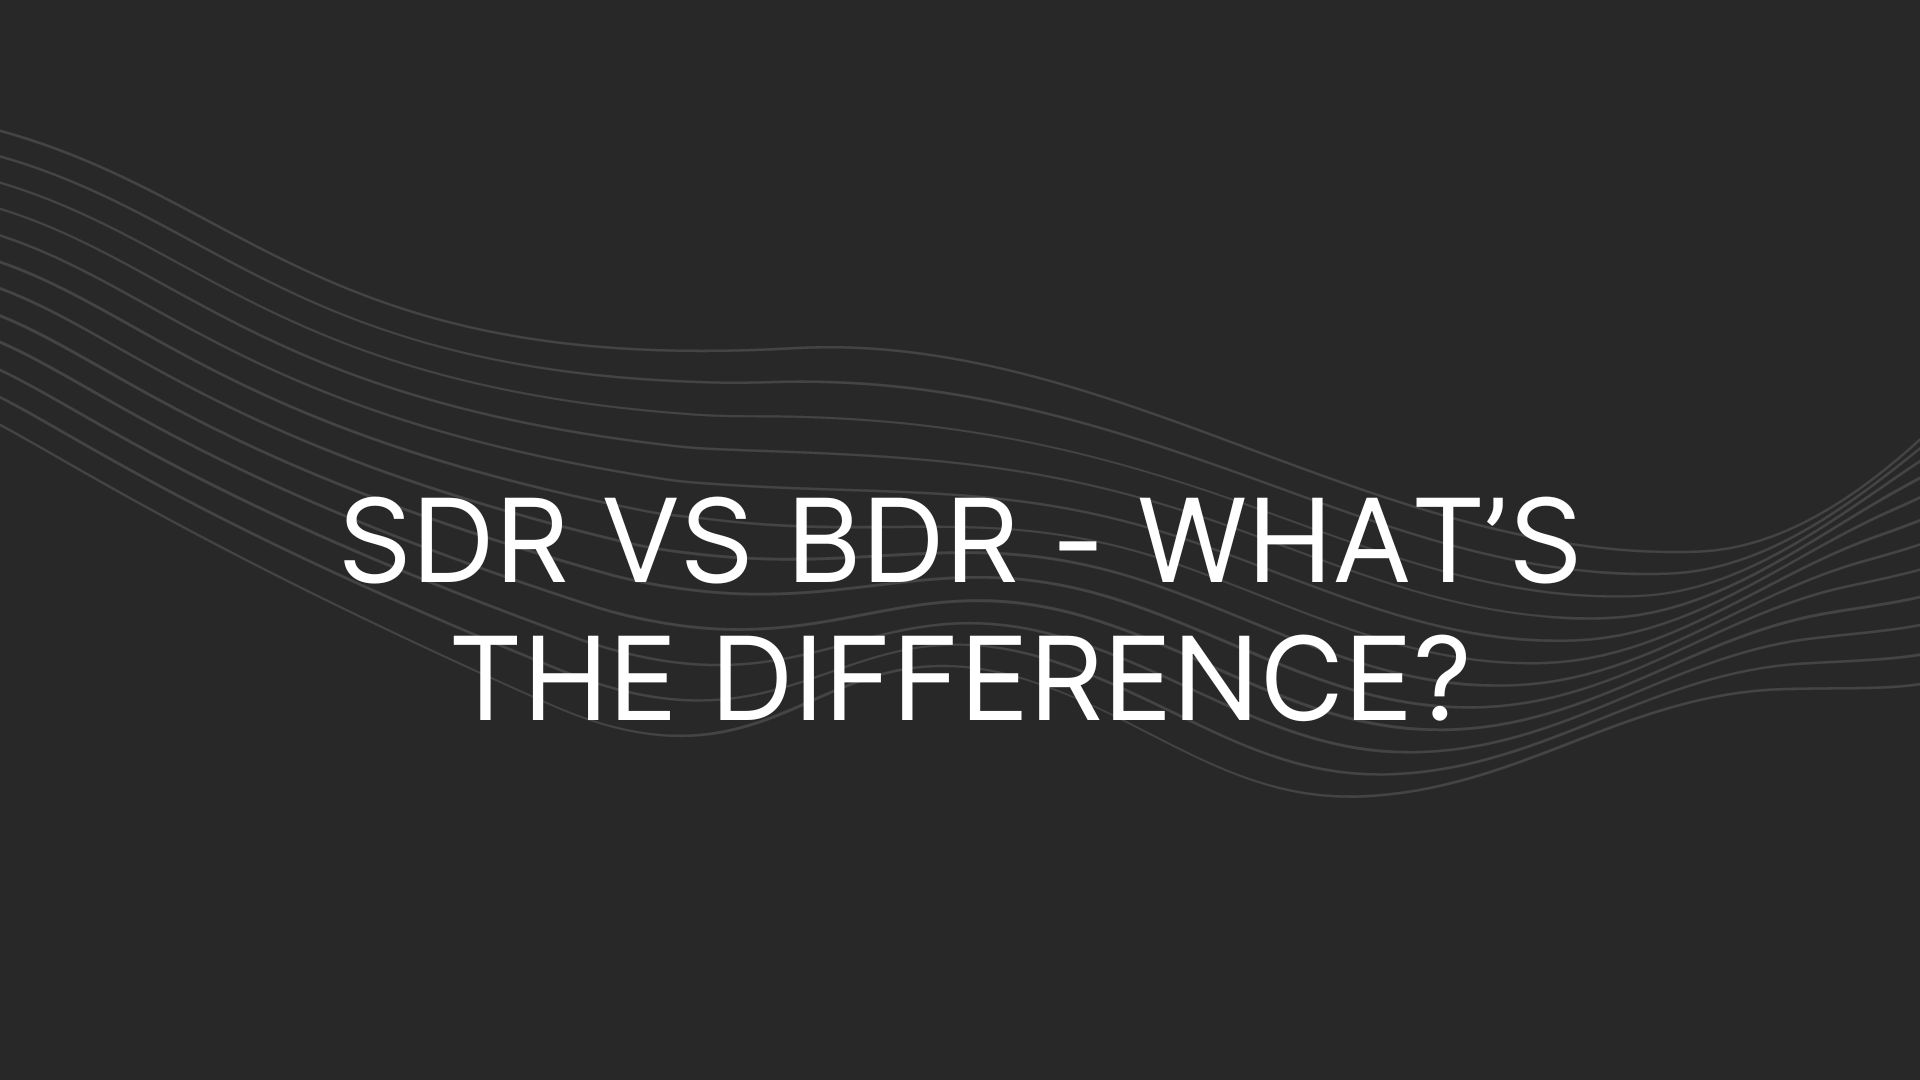 SDR vs BDR – What’s the difference?